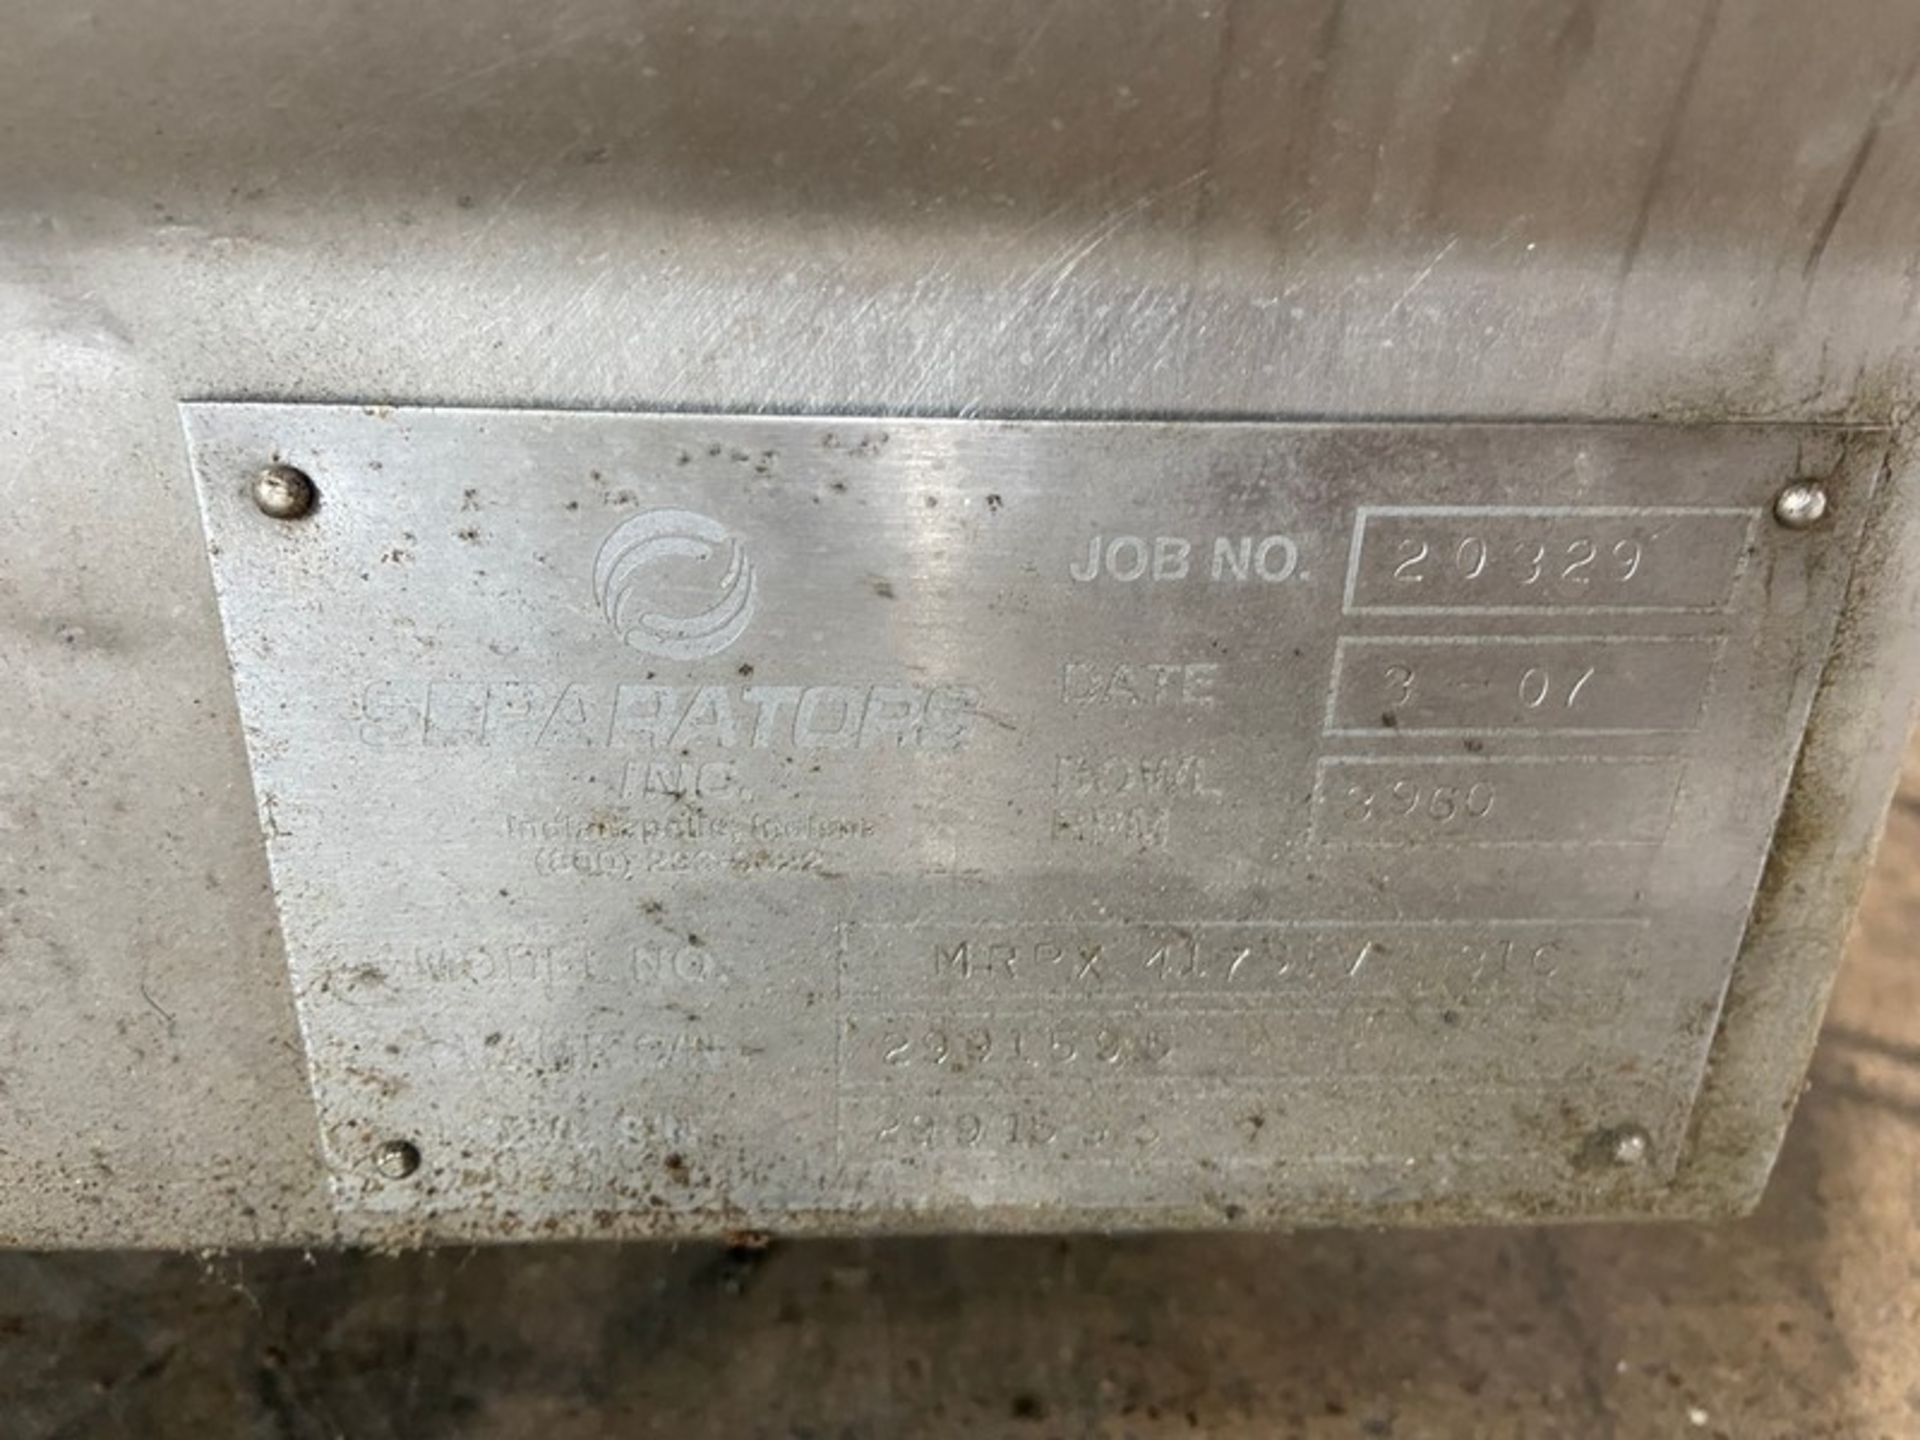 Separator Inc. S/S Separator,-M/N MRPX4179IV316, S/N 2991595, Bowl RPM 3960(INV#88847) (Located @ - Image 12 of 12